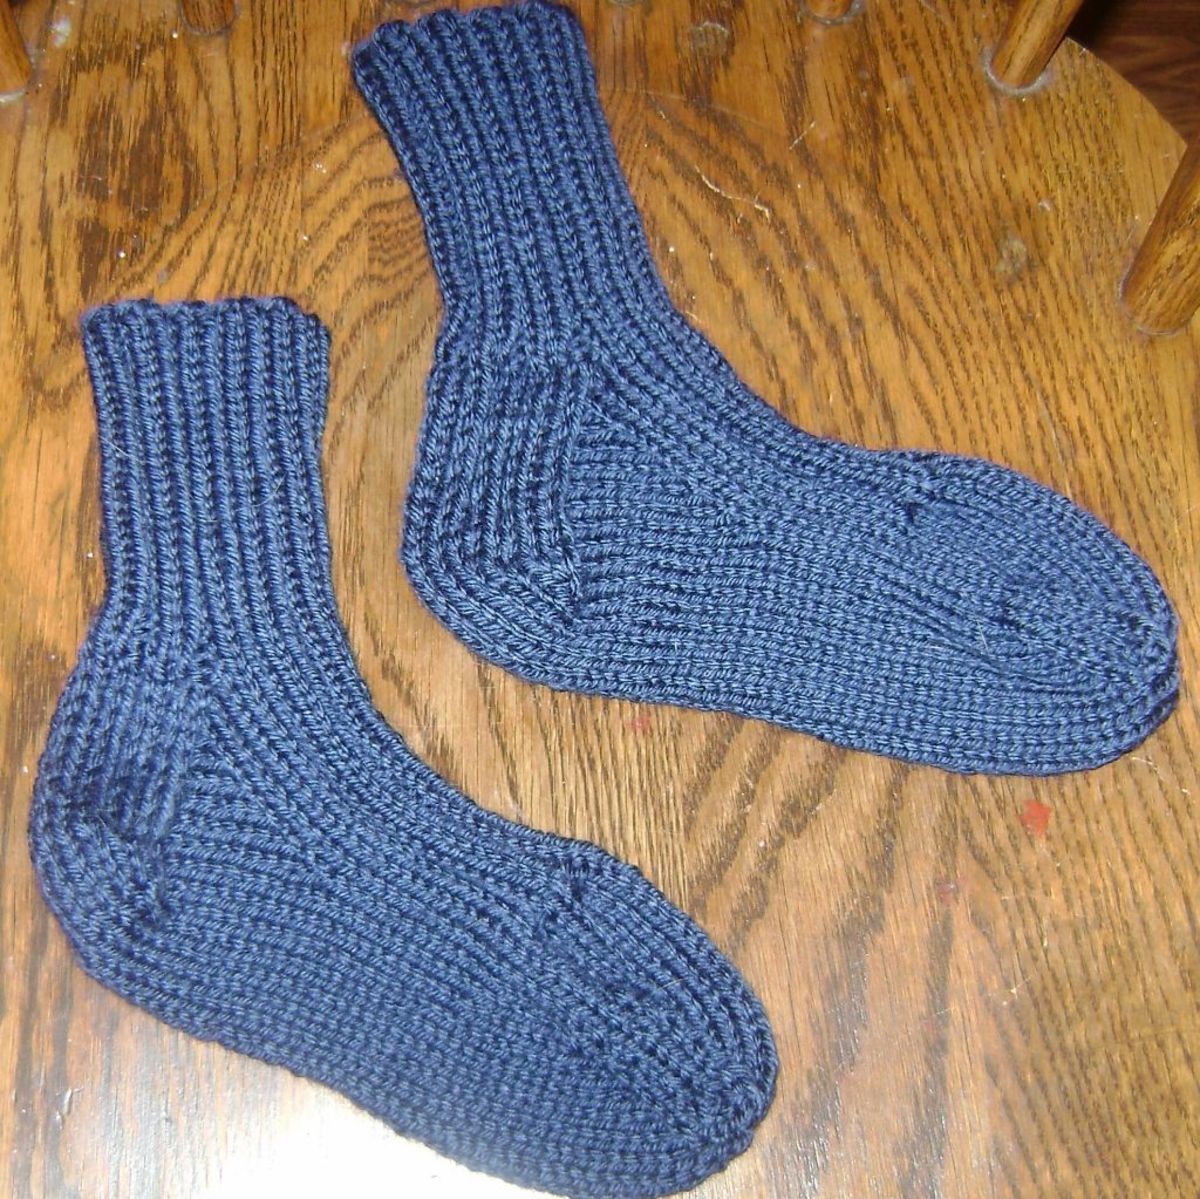 Warm worsted-weight socks